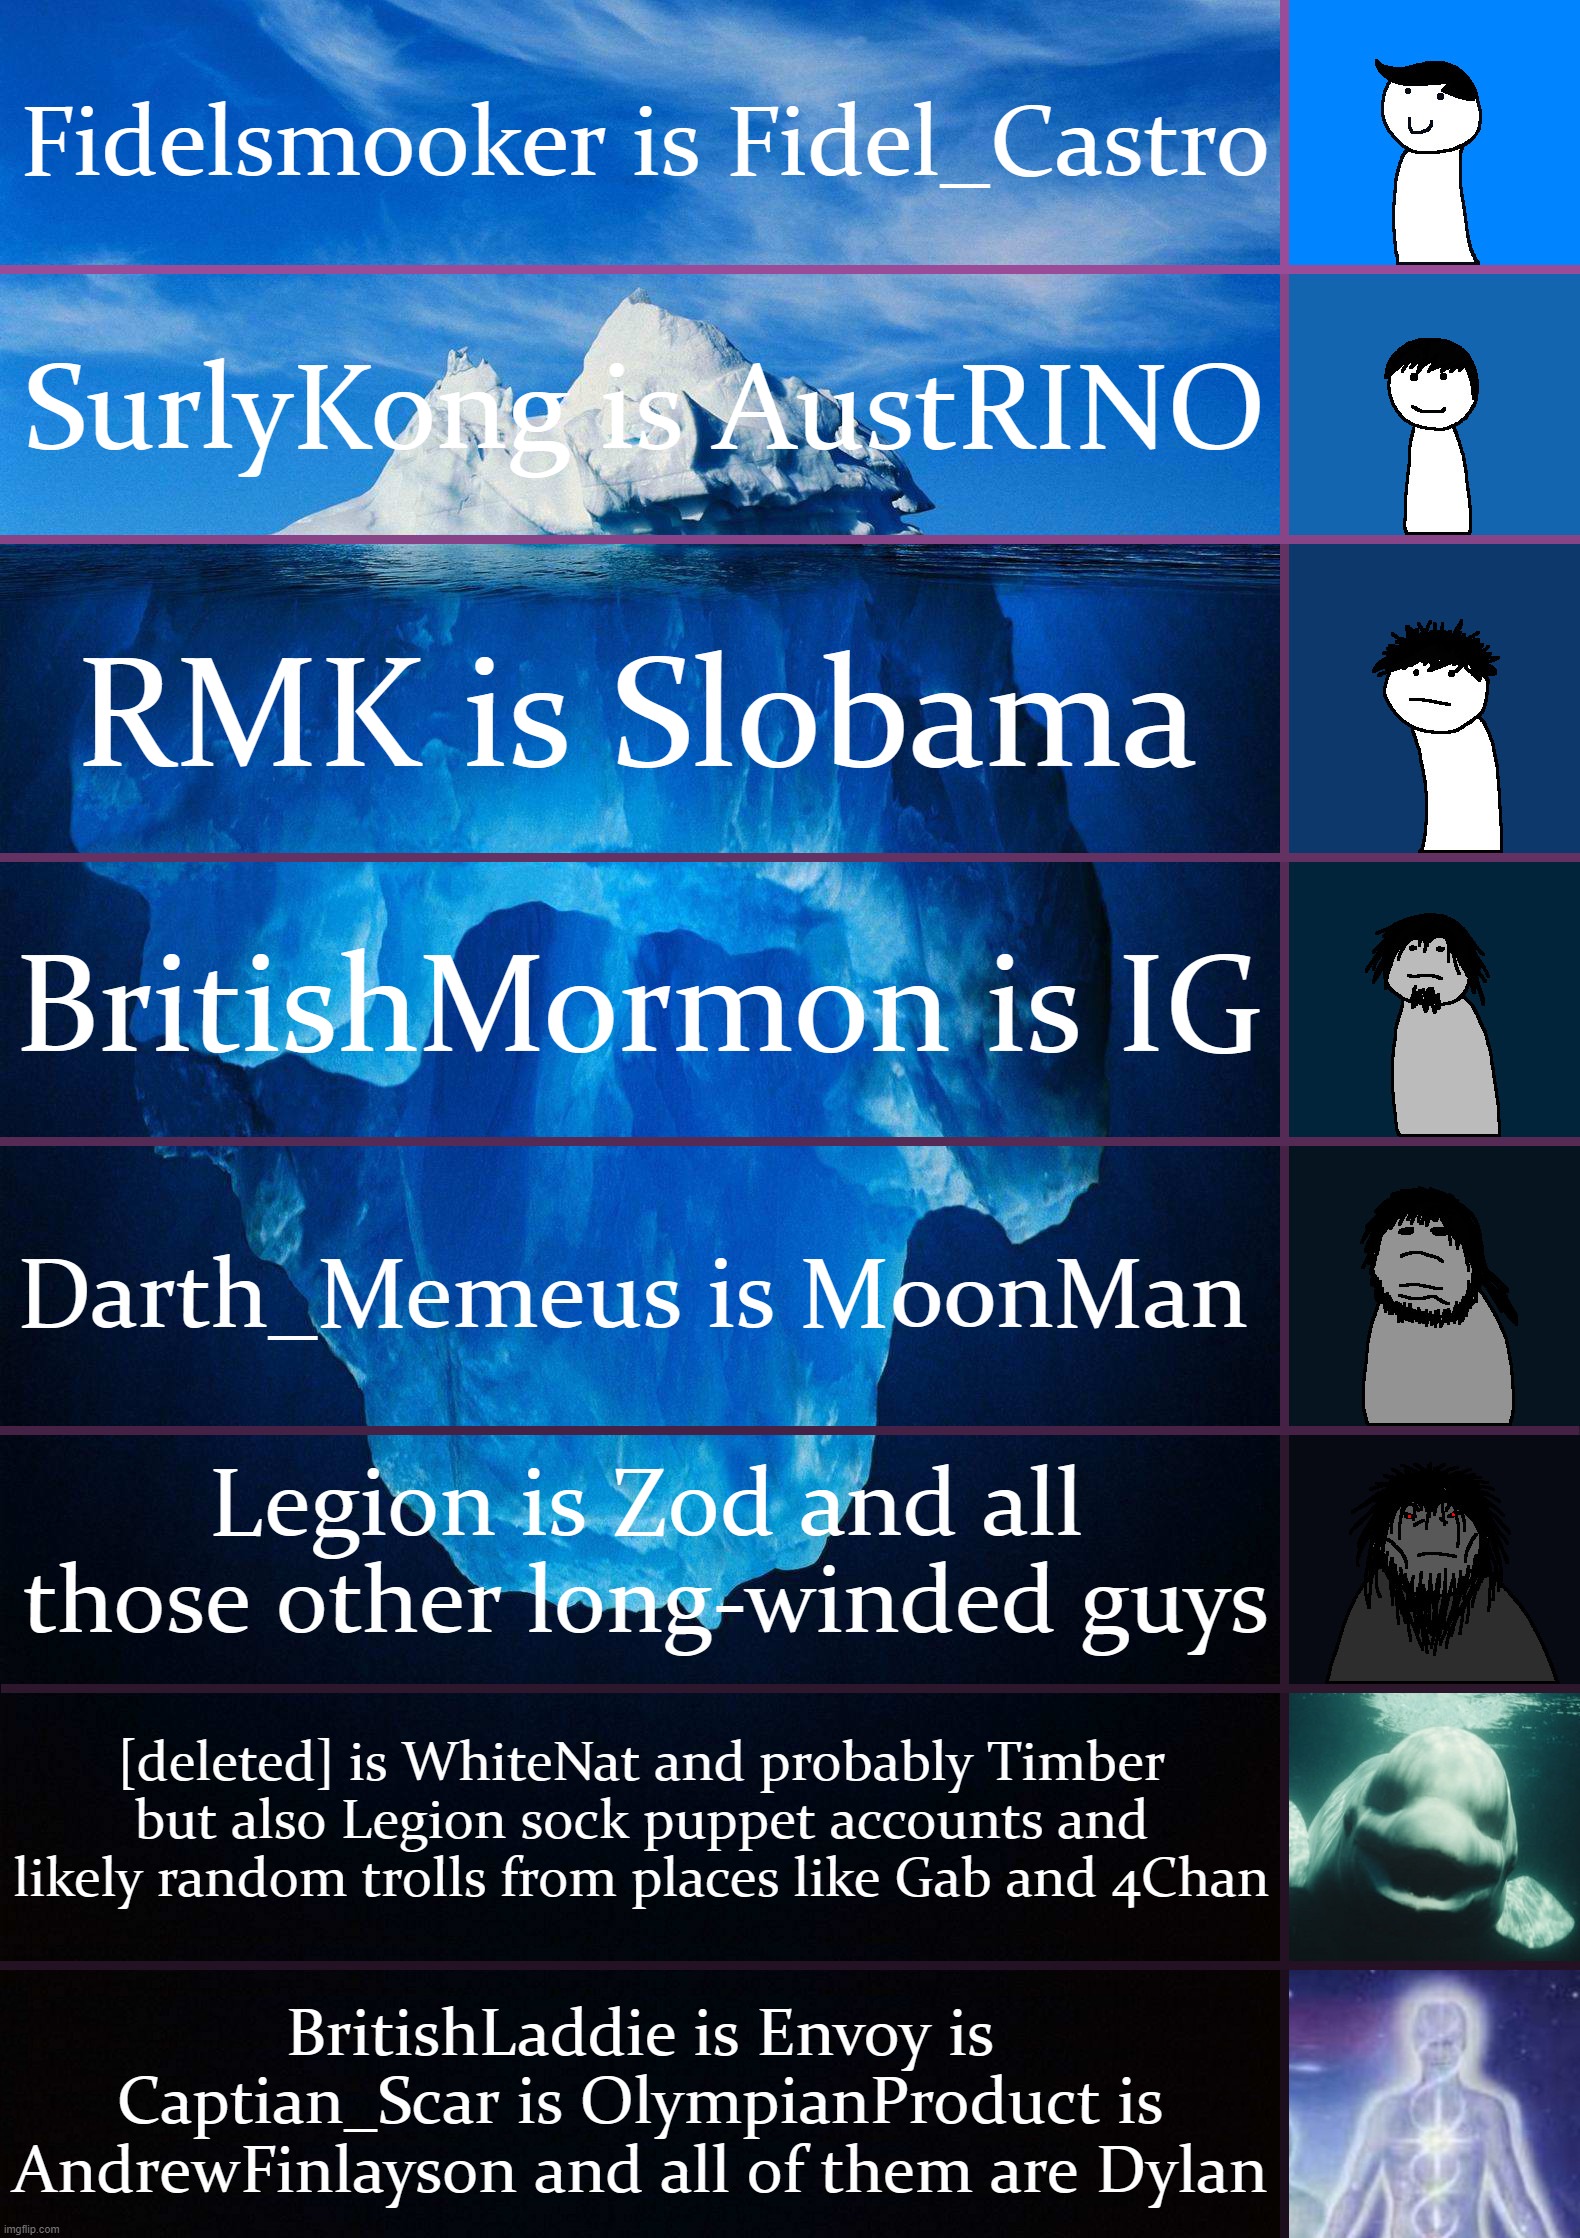 IMGFLIP_PRESIDENTS conspiracies, true and false (I don't even know anymore) | Fidelsmooker is Fidel_Castro; SurlyKong is AustRINO; RMK is Slobama; BritishMormon is IG; Darth_Memeus is M00nMan; Legion is Zod and all those other long-winded guys; [deleted] is WhiteNat and probably Timber but also Legion sock puppet accounts and likely random trolls from places like Gab and 4Chan; BritishLaddie is Envoy is Captian_Scar is OlympianProduct is AndrewFinlayson and all of them are Dylan | image tagged in iceberg levels tiers,imgflipmyths,imgflip_myths,imgflip users,imgflip community,imgflip_presidents | made w/ Imgflip meme maker